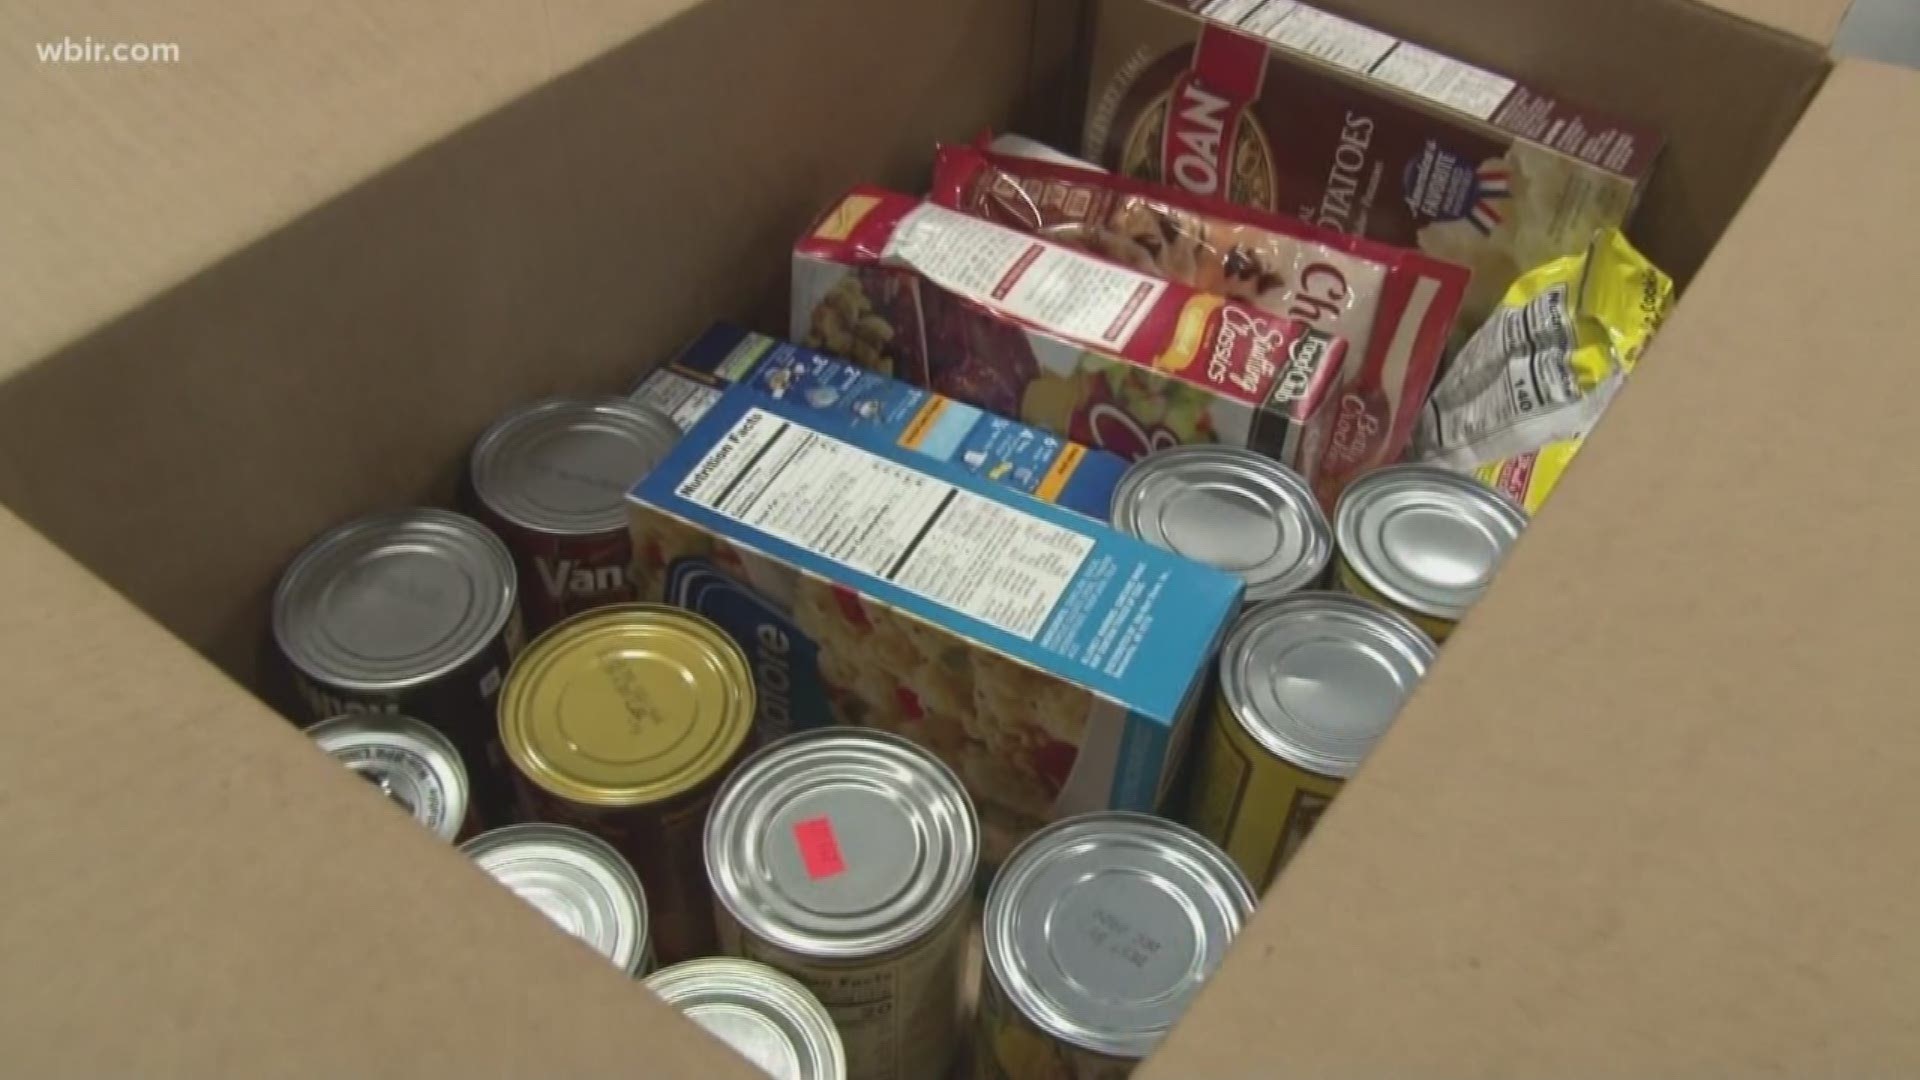 Second Harvest Food Bank is lending a helping hand to people in need in East Tennessee affected by the shutdown.